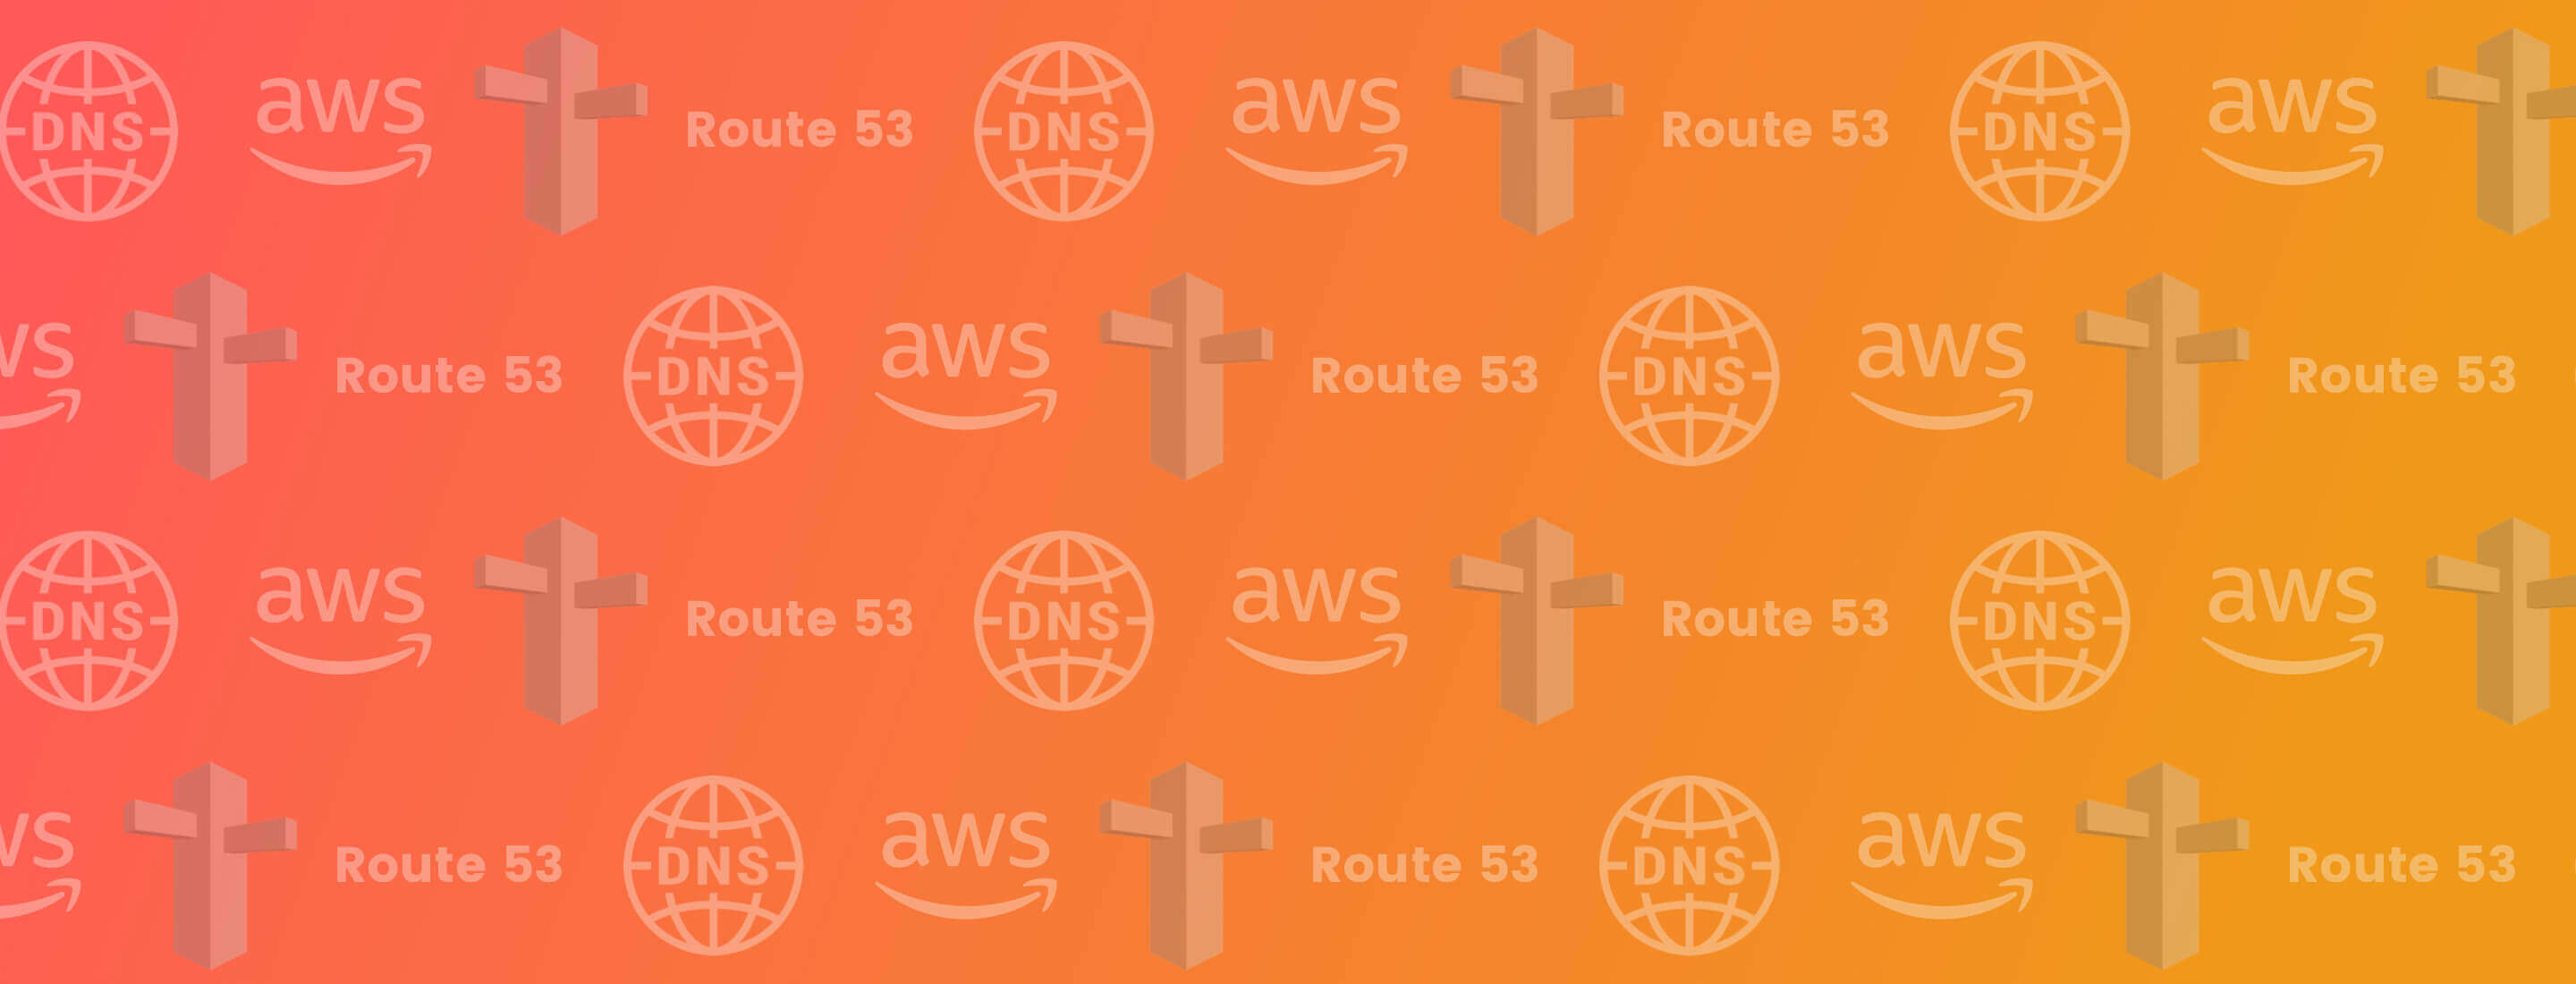 web services - Can't redirect Route 53 registered domain to